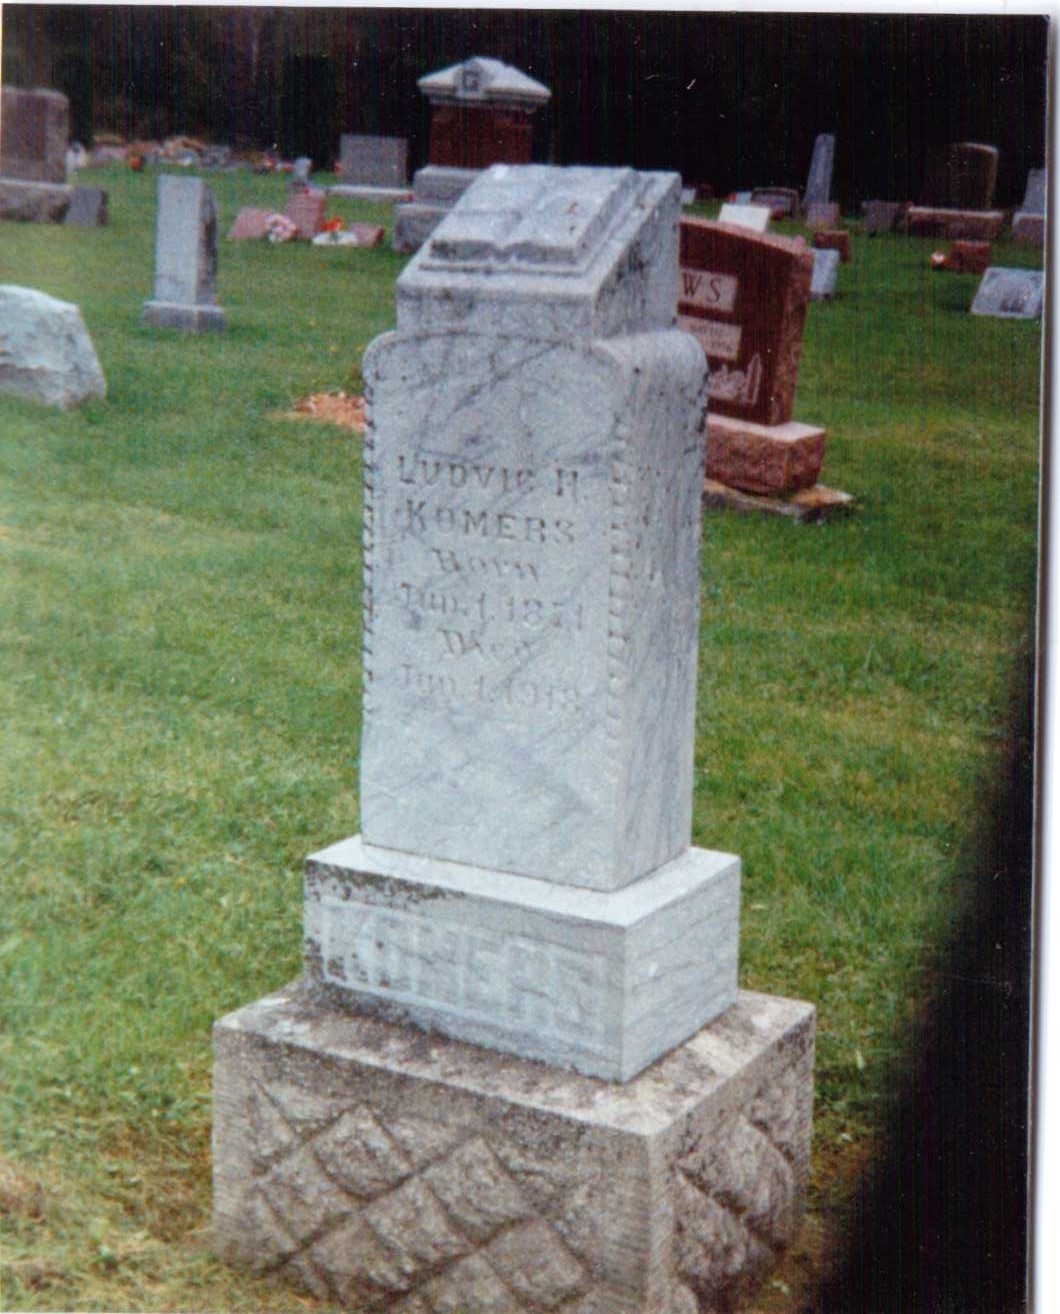 Ludvic "Lud" Henry Komers Grave, WI